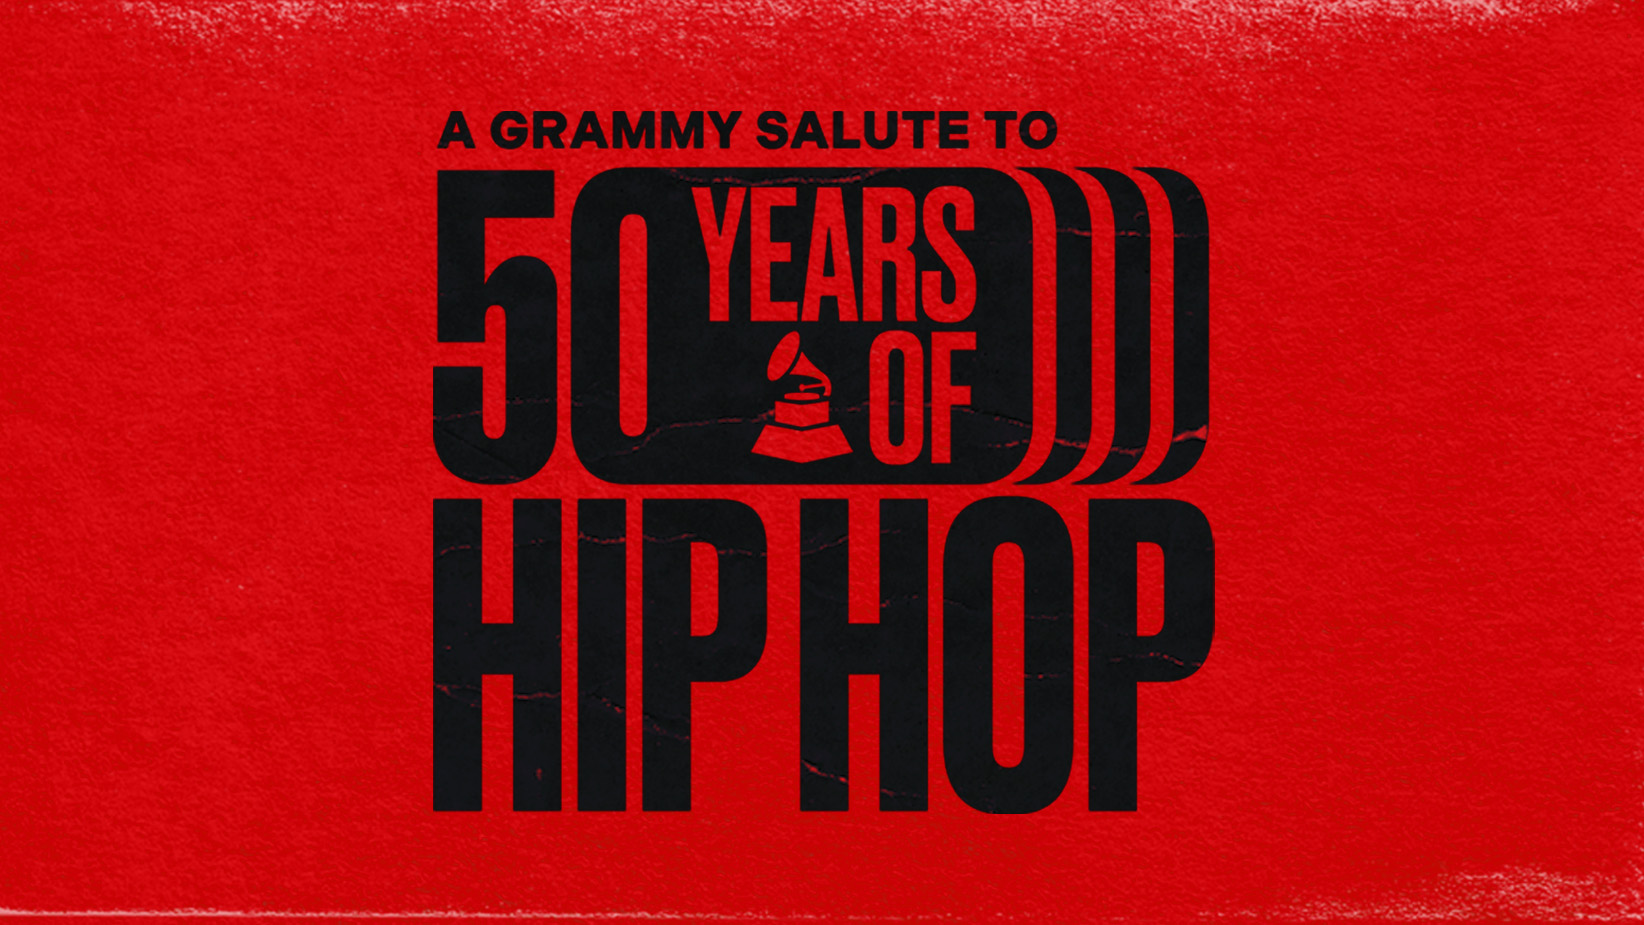 Jermaine Dupri Reflects On The Global Impact Of Hip-Hop At "A GRAMMY Salute To 50 Years Of Hip-Hop"